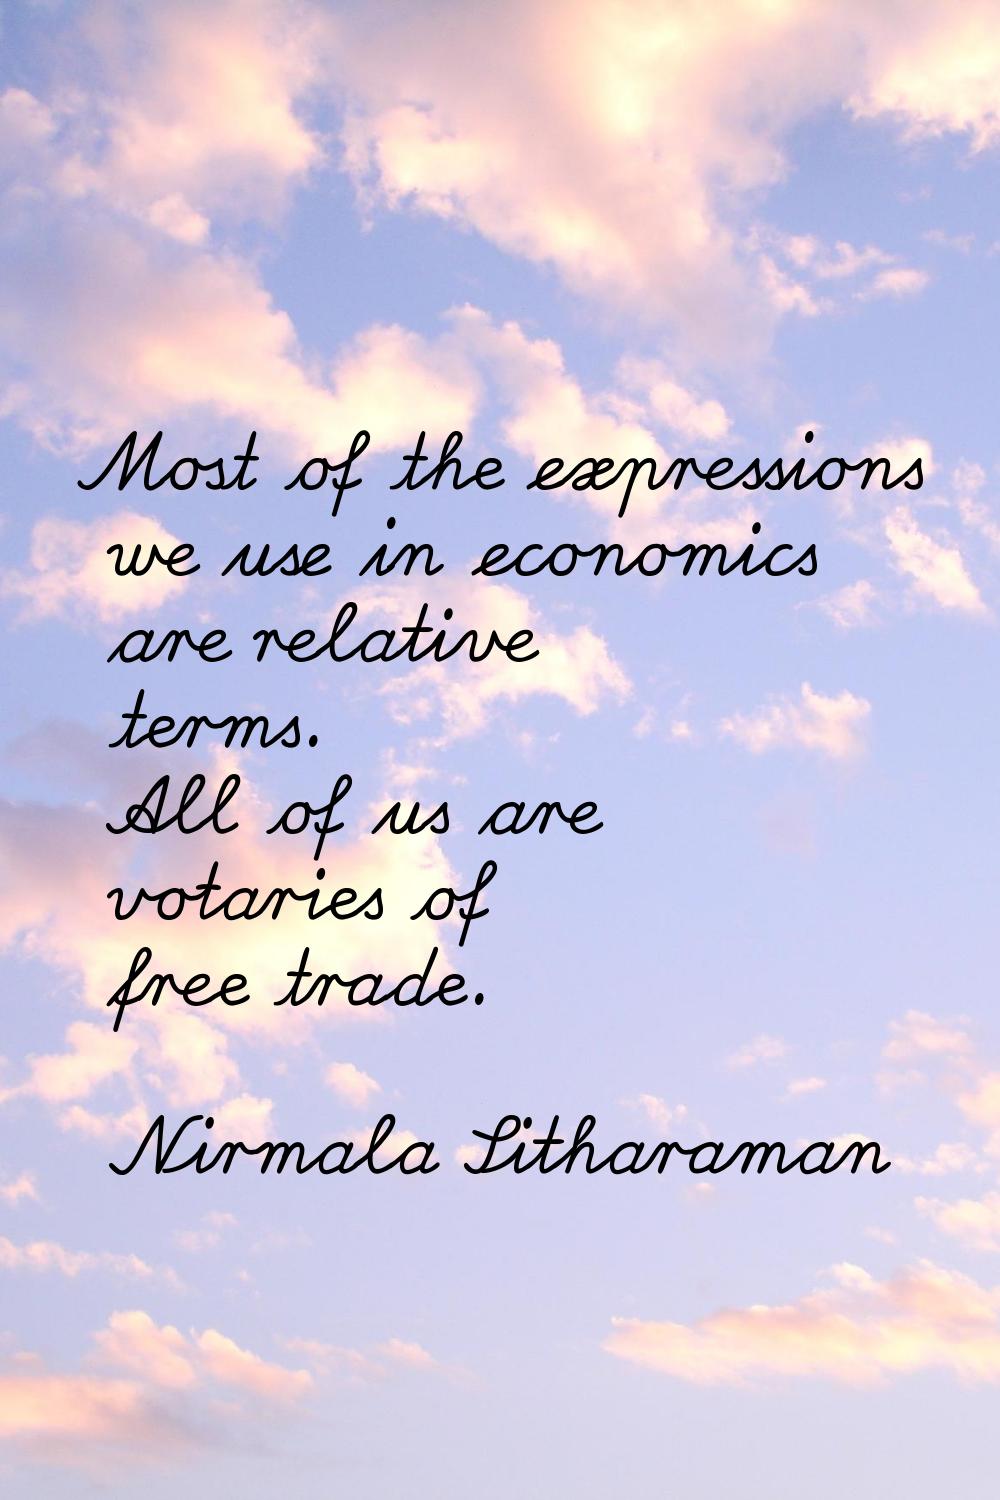 Most of the expressions we use in economics are relative terms. All of us are votaries of free trad